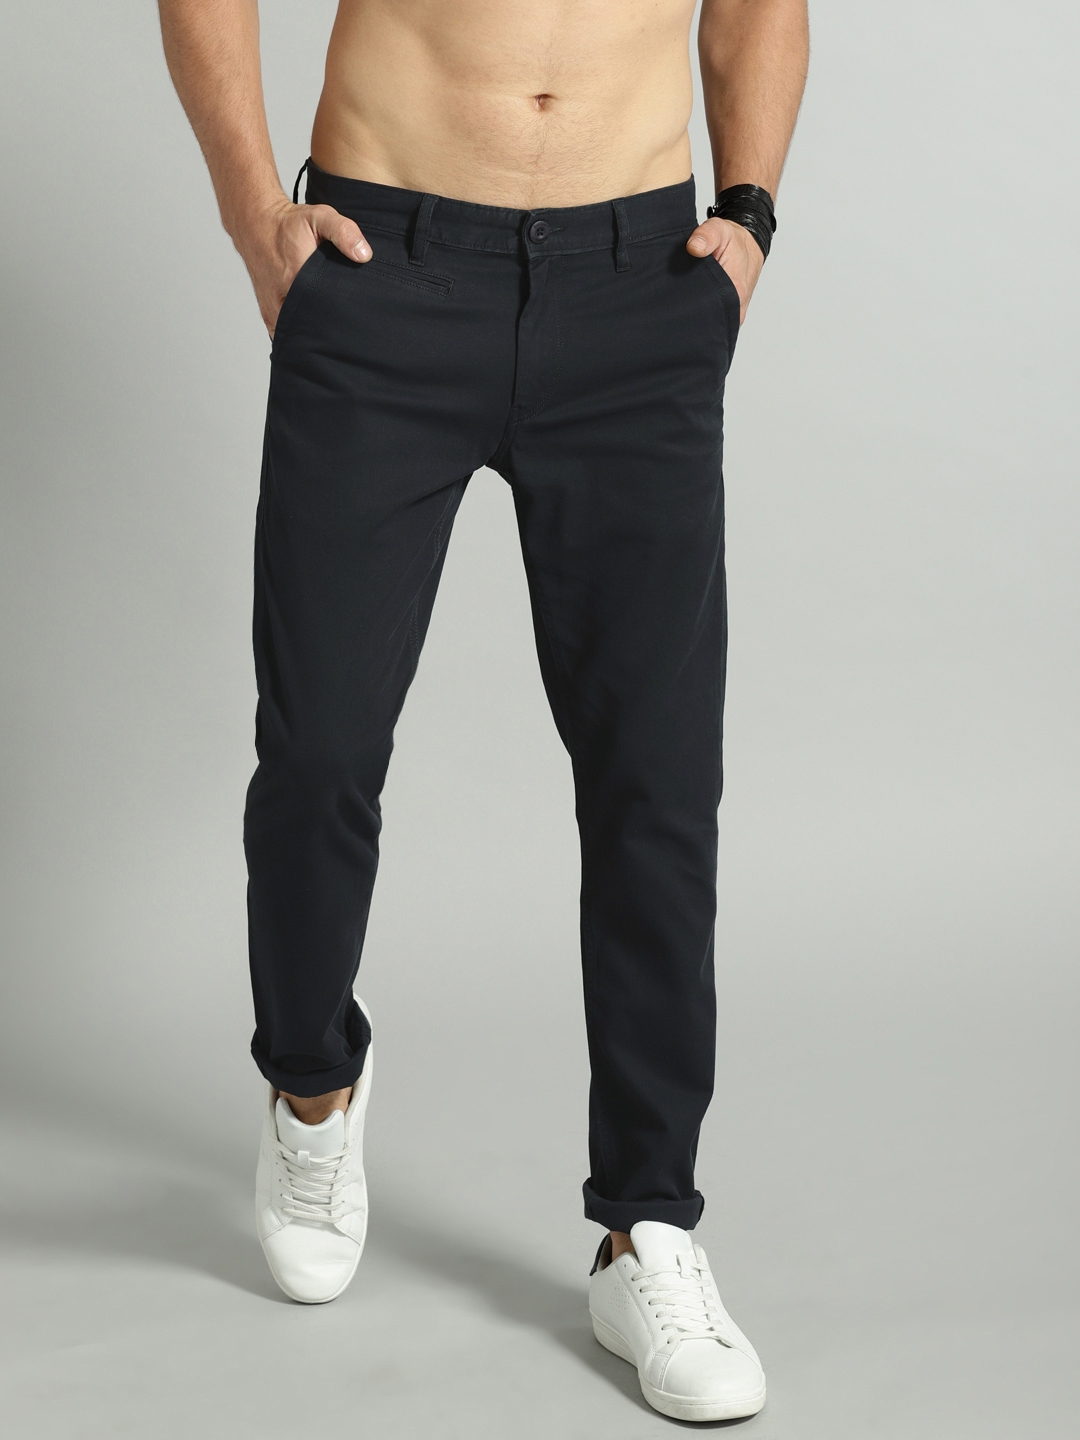 Buy Roadster Trousers online  Men  737 products  FASHIOLAin